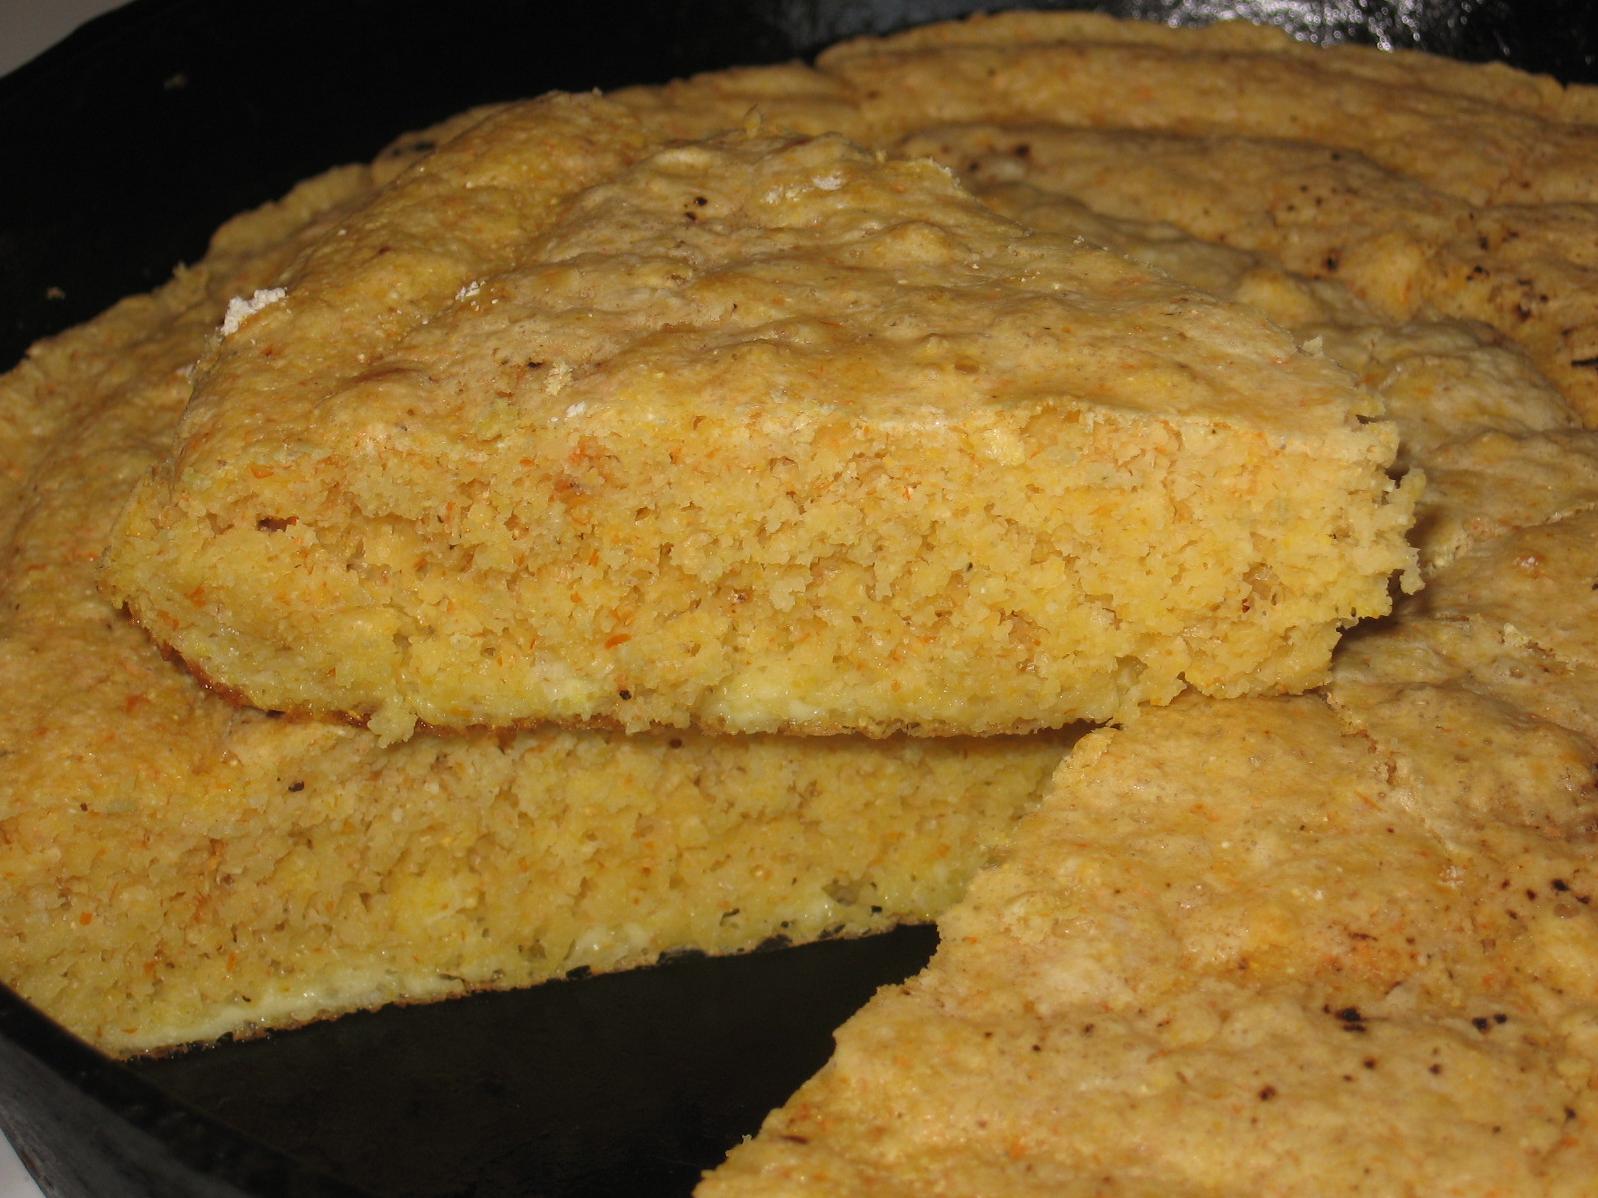  A warm slice of cornbread is the ultimate comfort food.